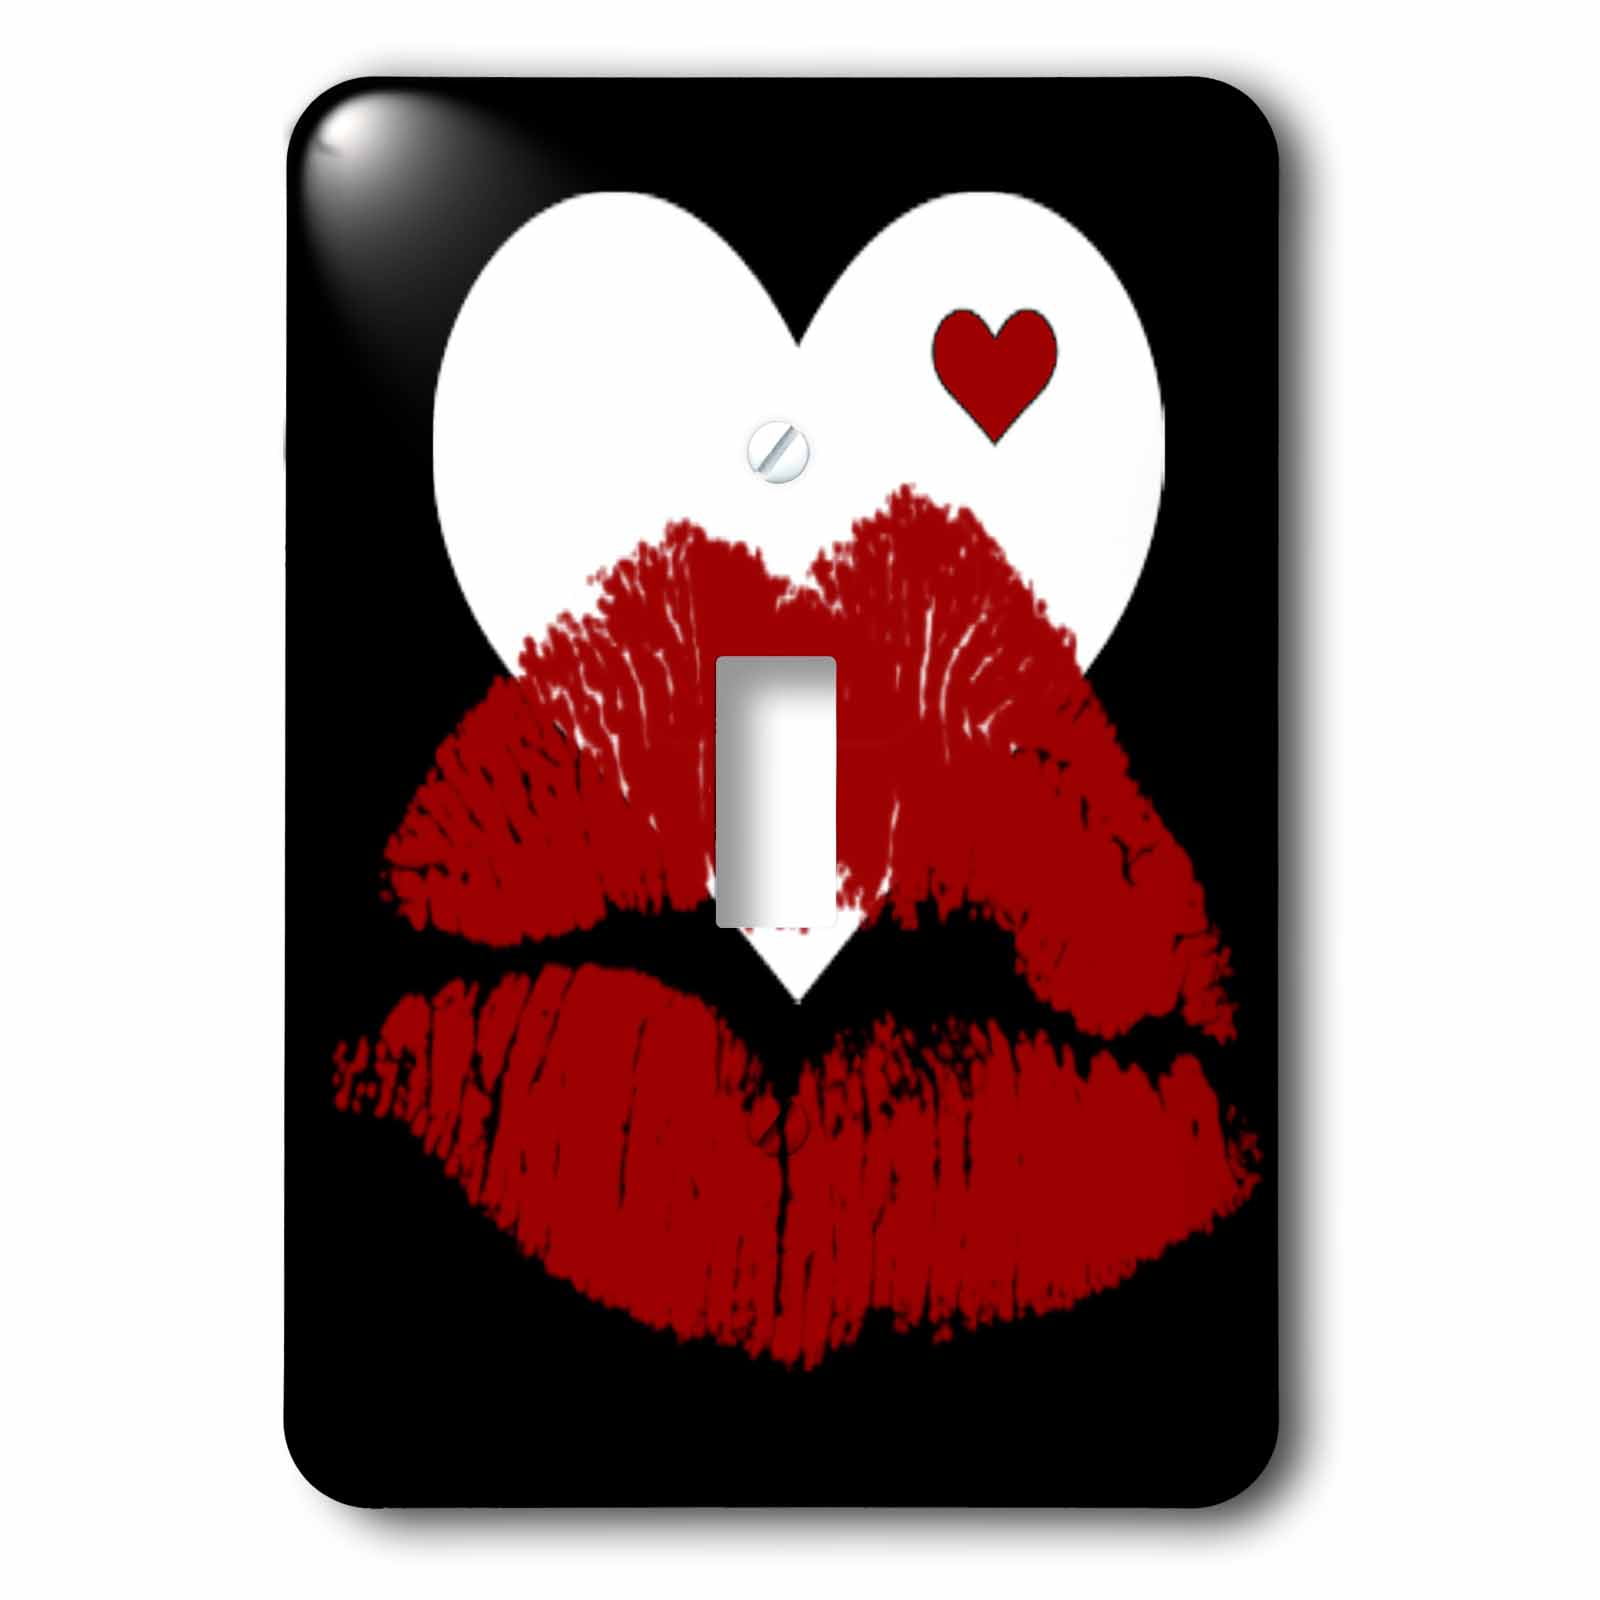 3dRose Red Lips Against A White Heart Against Black Background, Single Toggle Switch